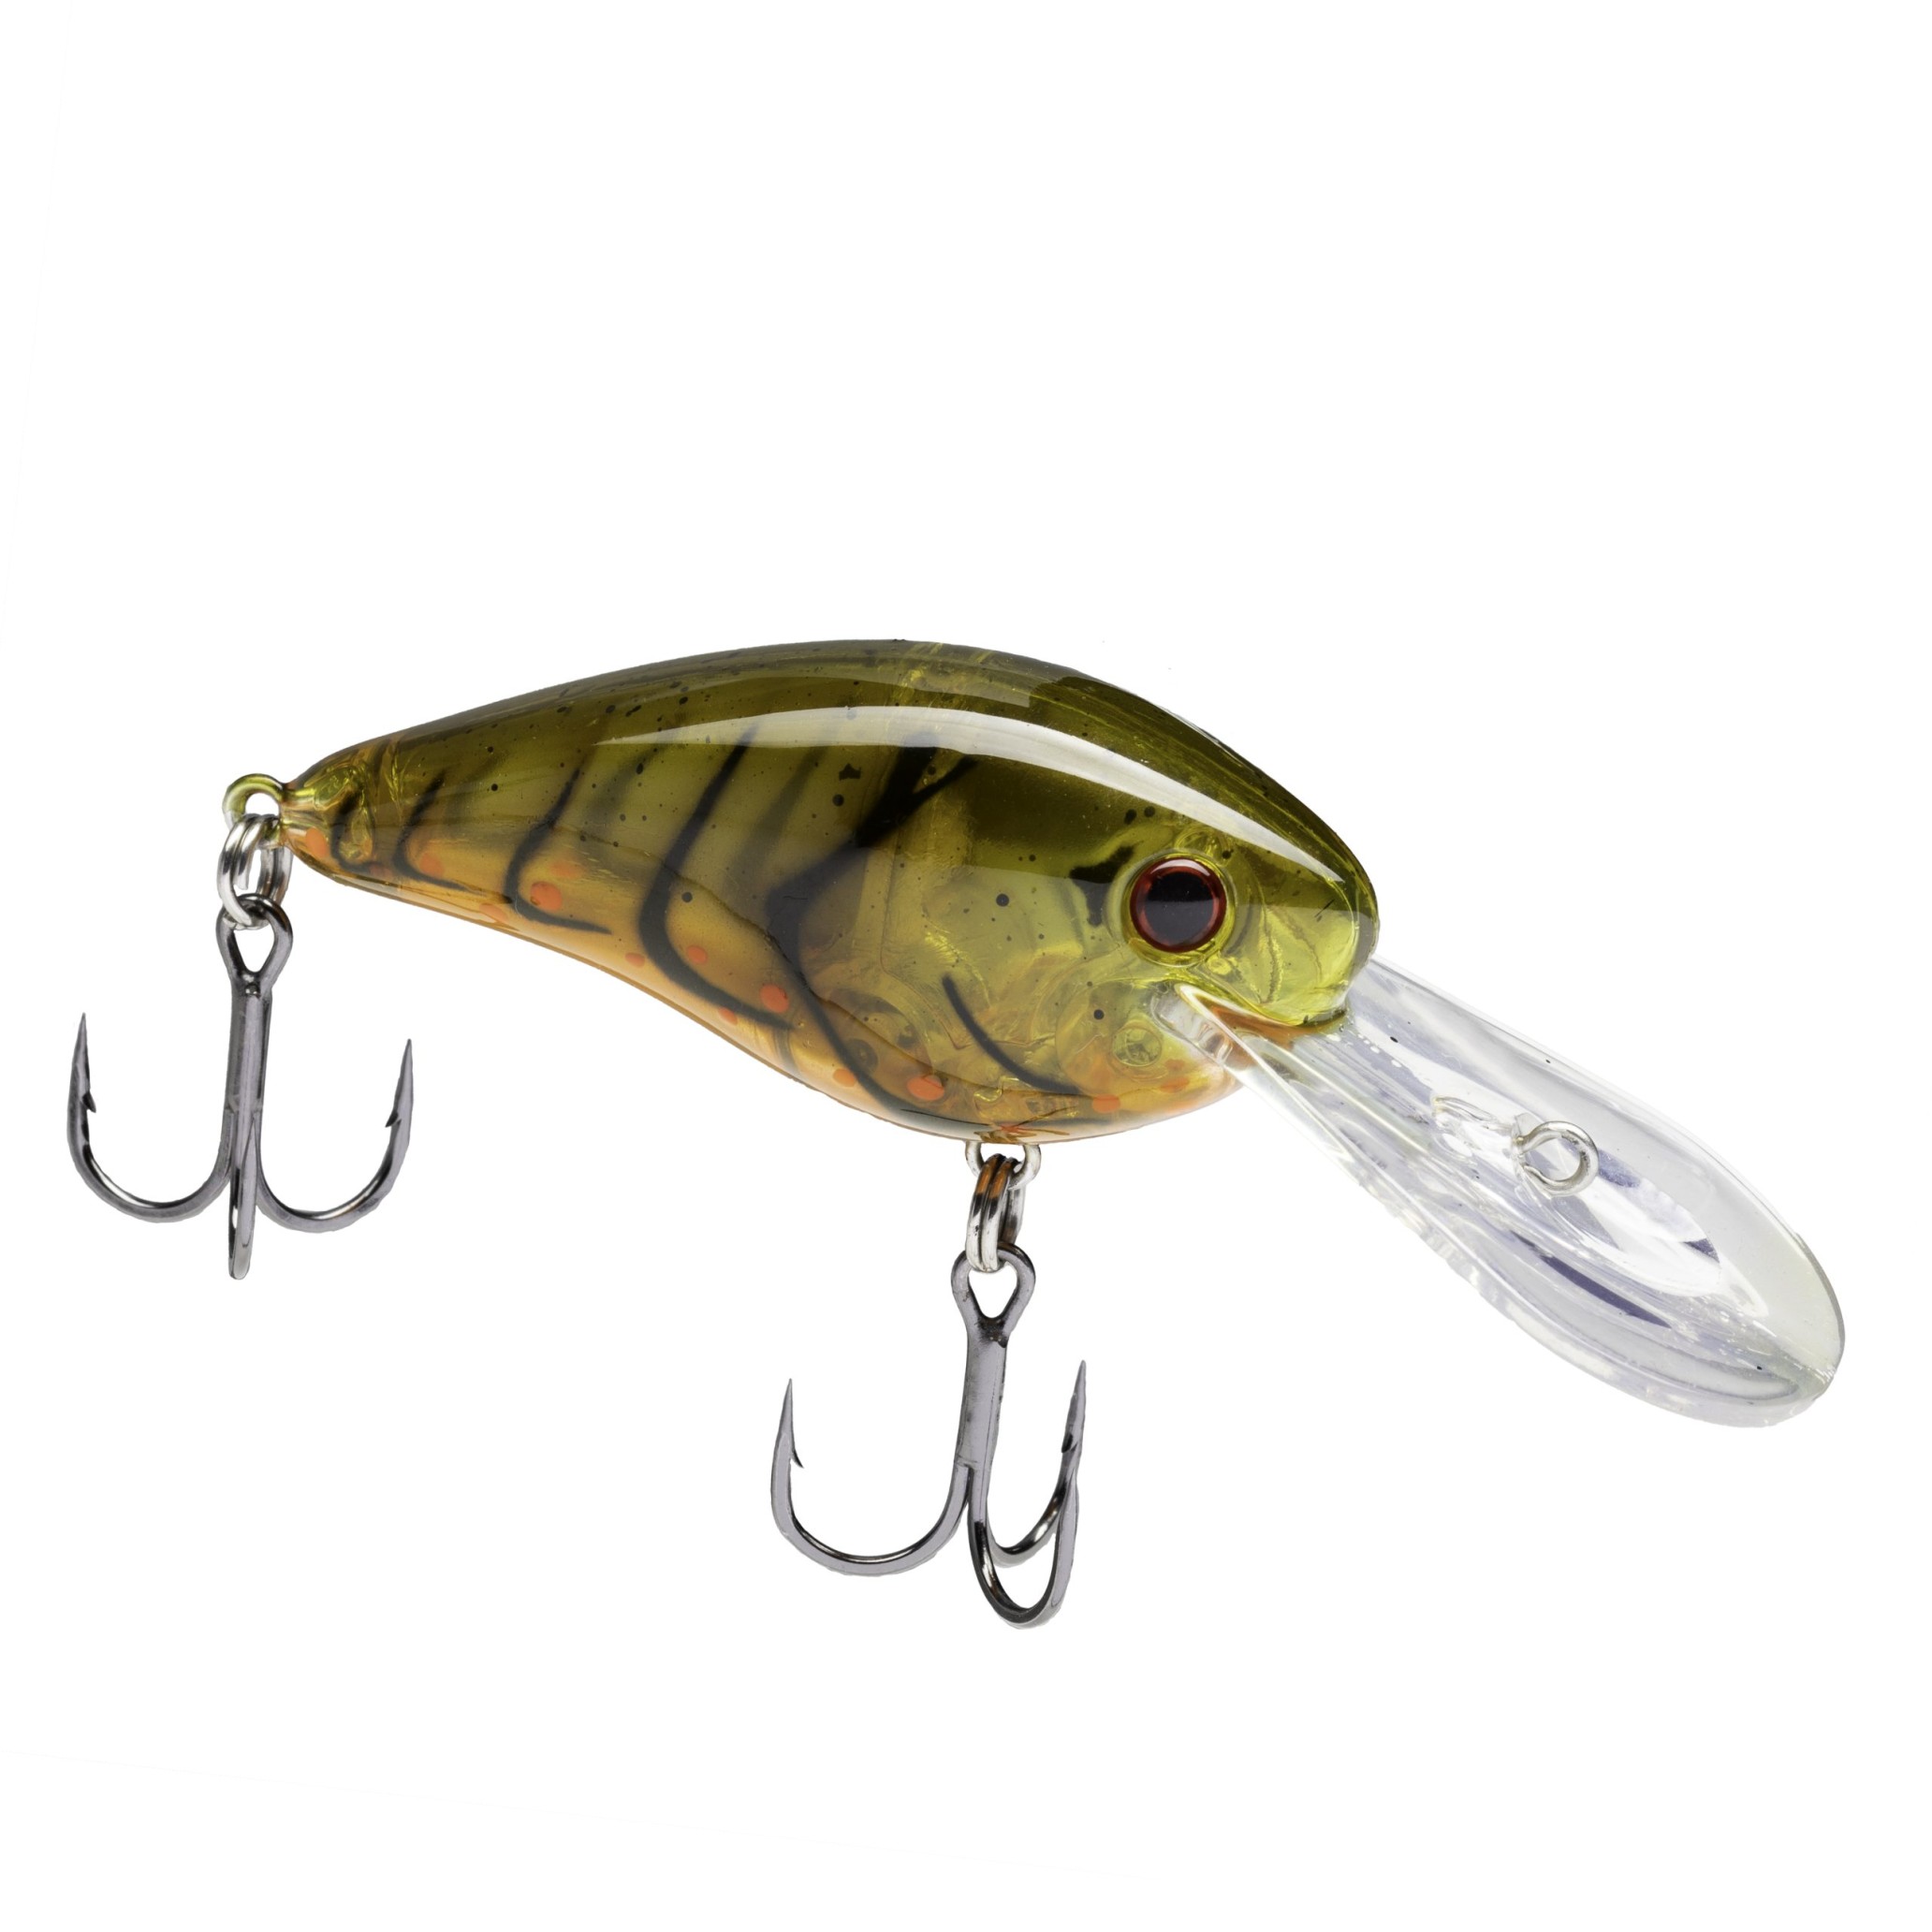 Strike King Releases New Crankbait Designed by KVD and Todd